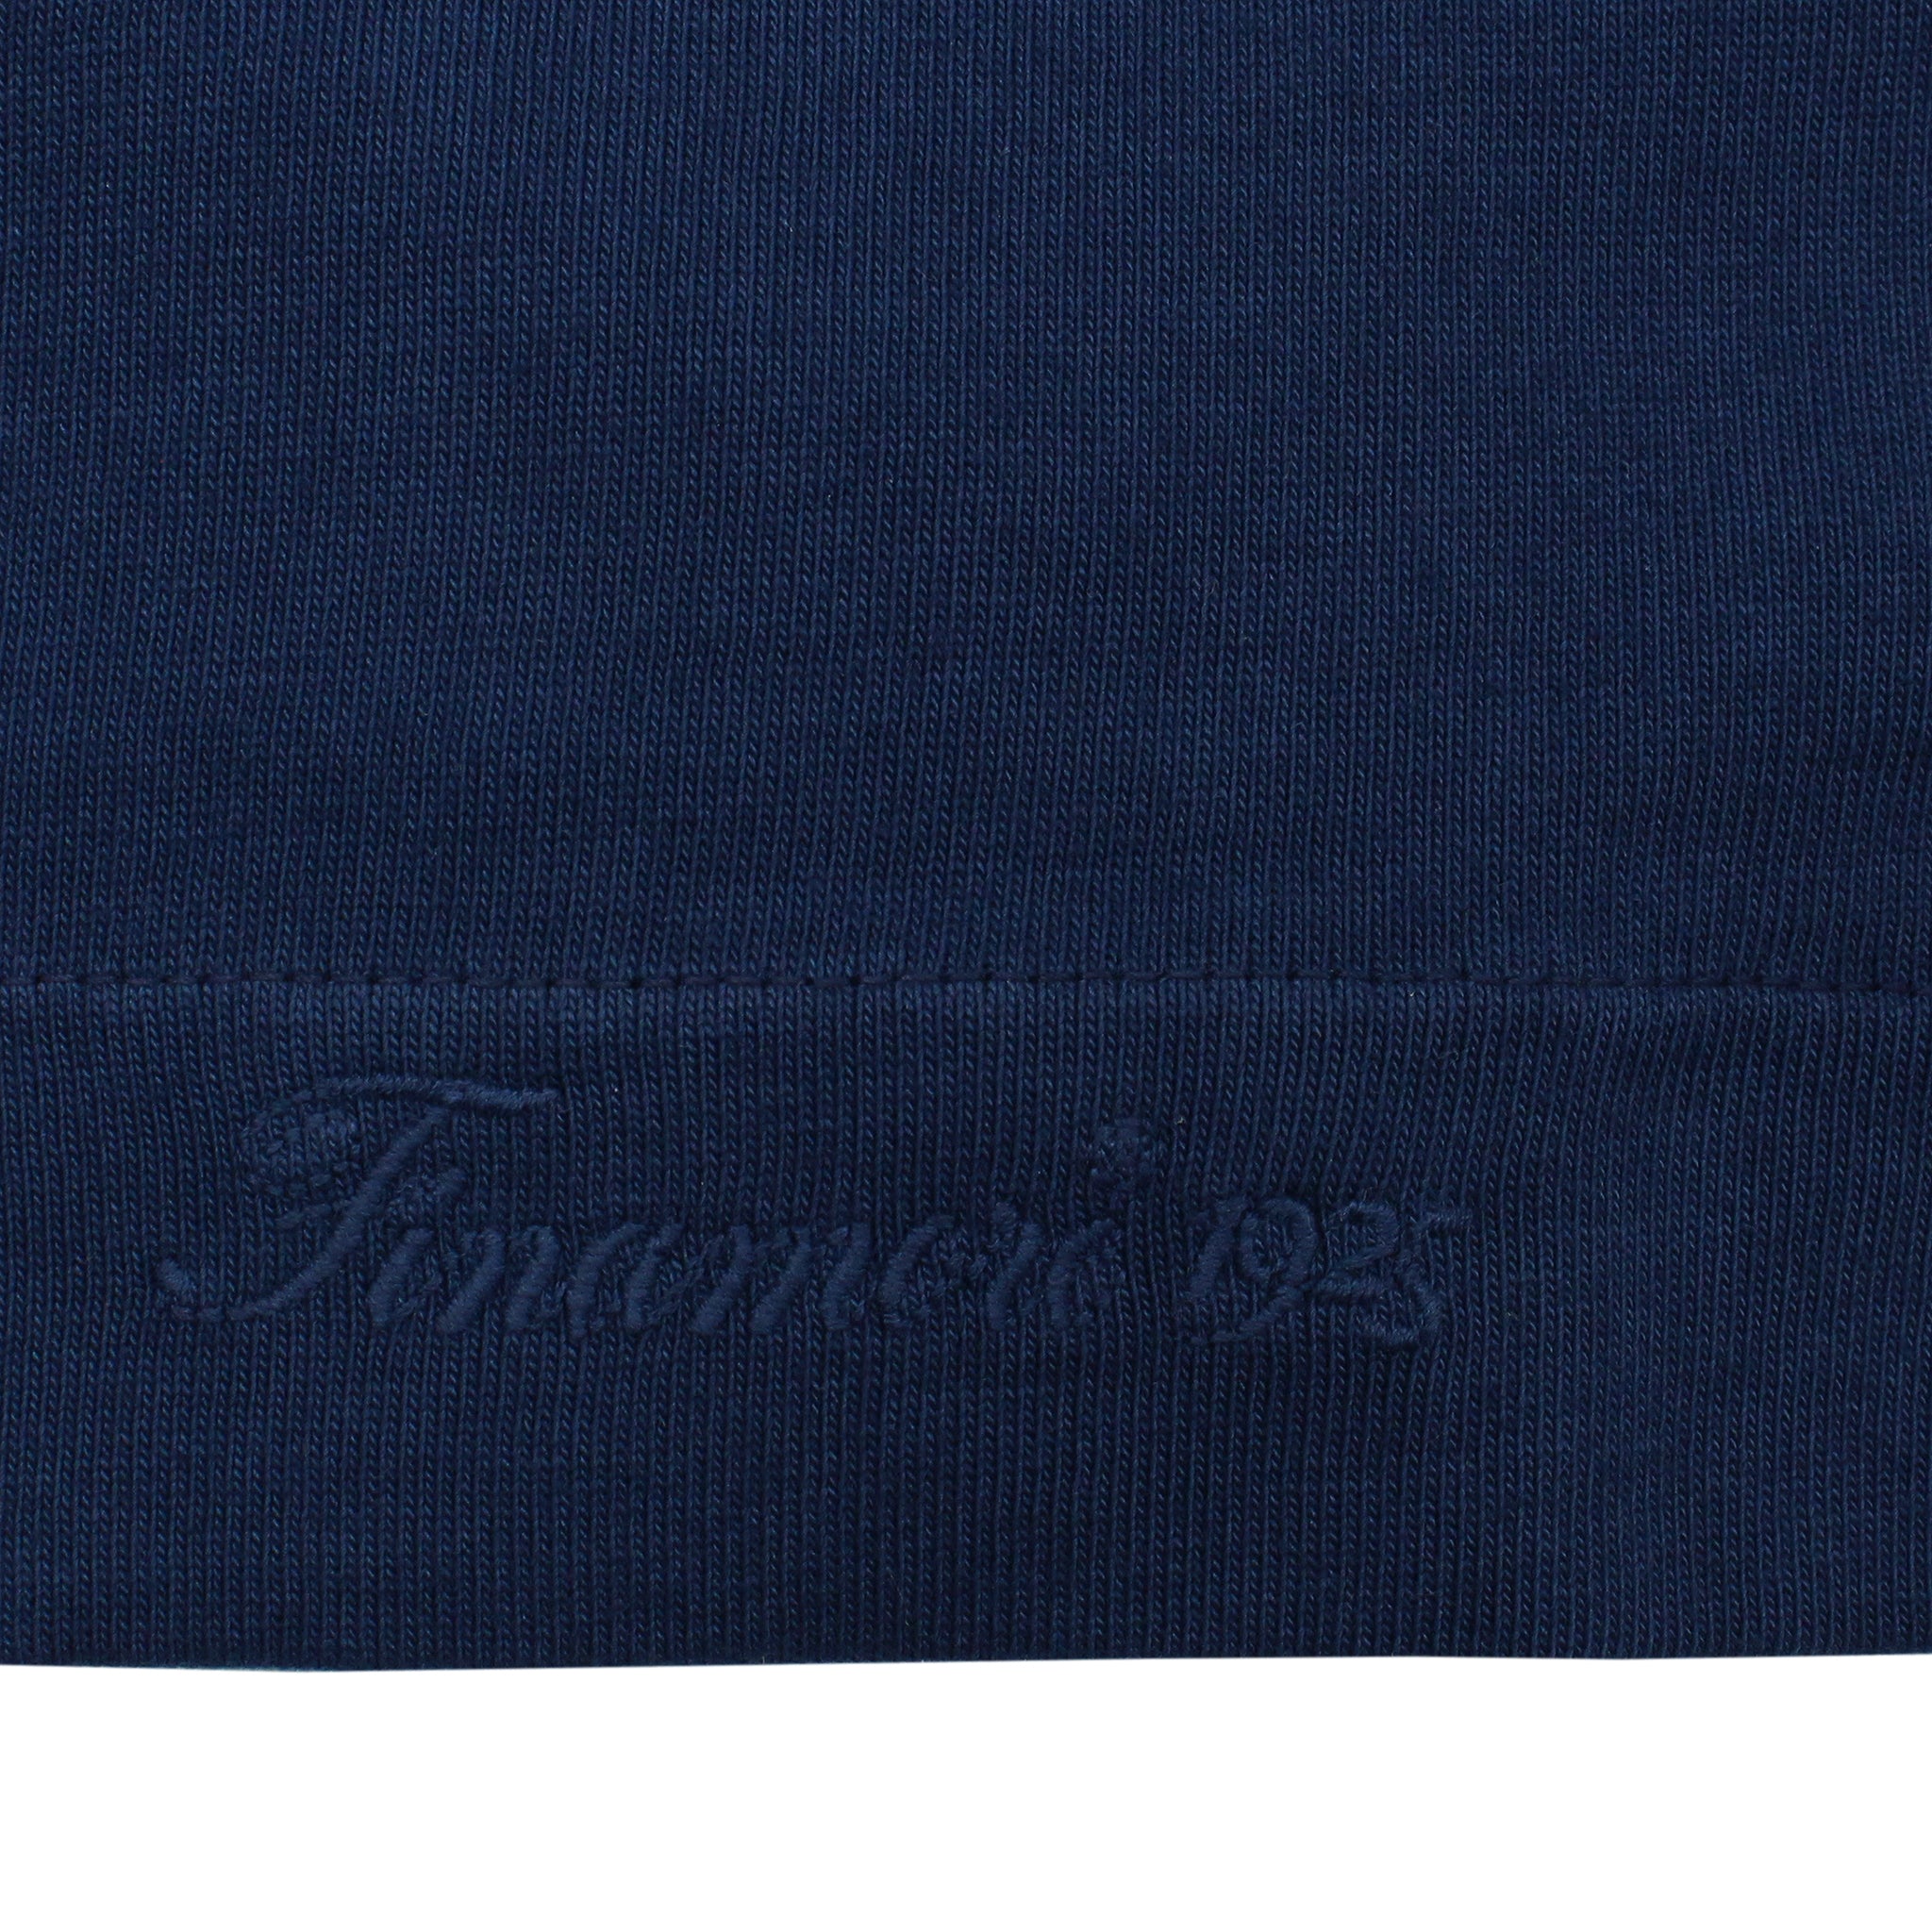 Blu navy garment dyed cotton T-shirt with Finamore 1925 logo